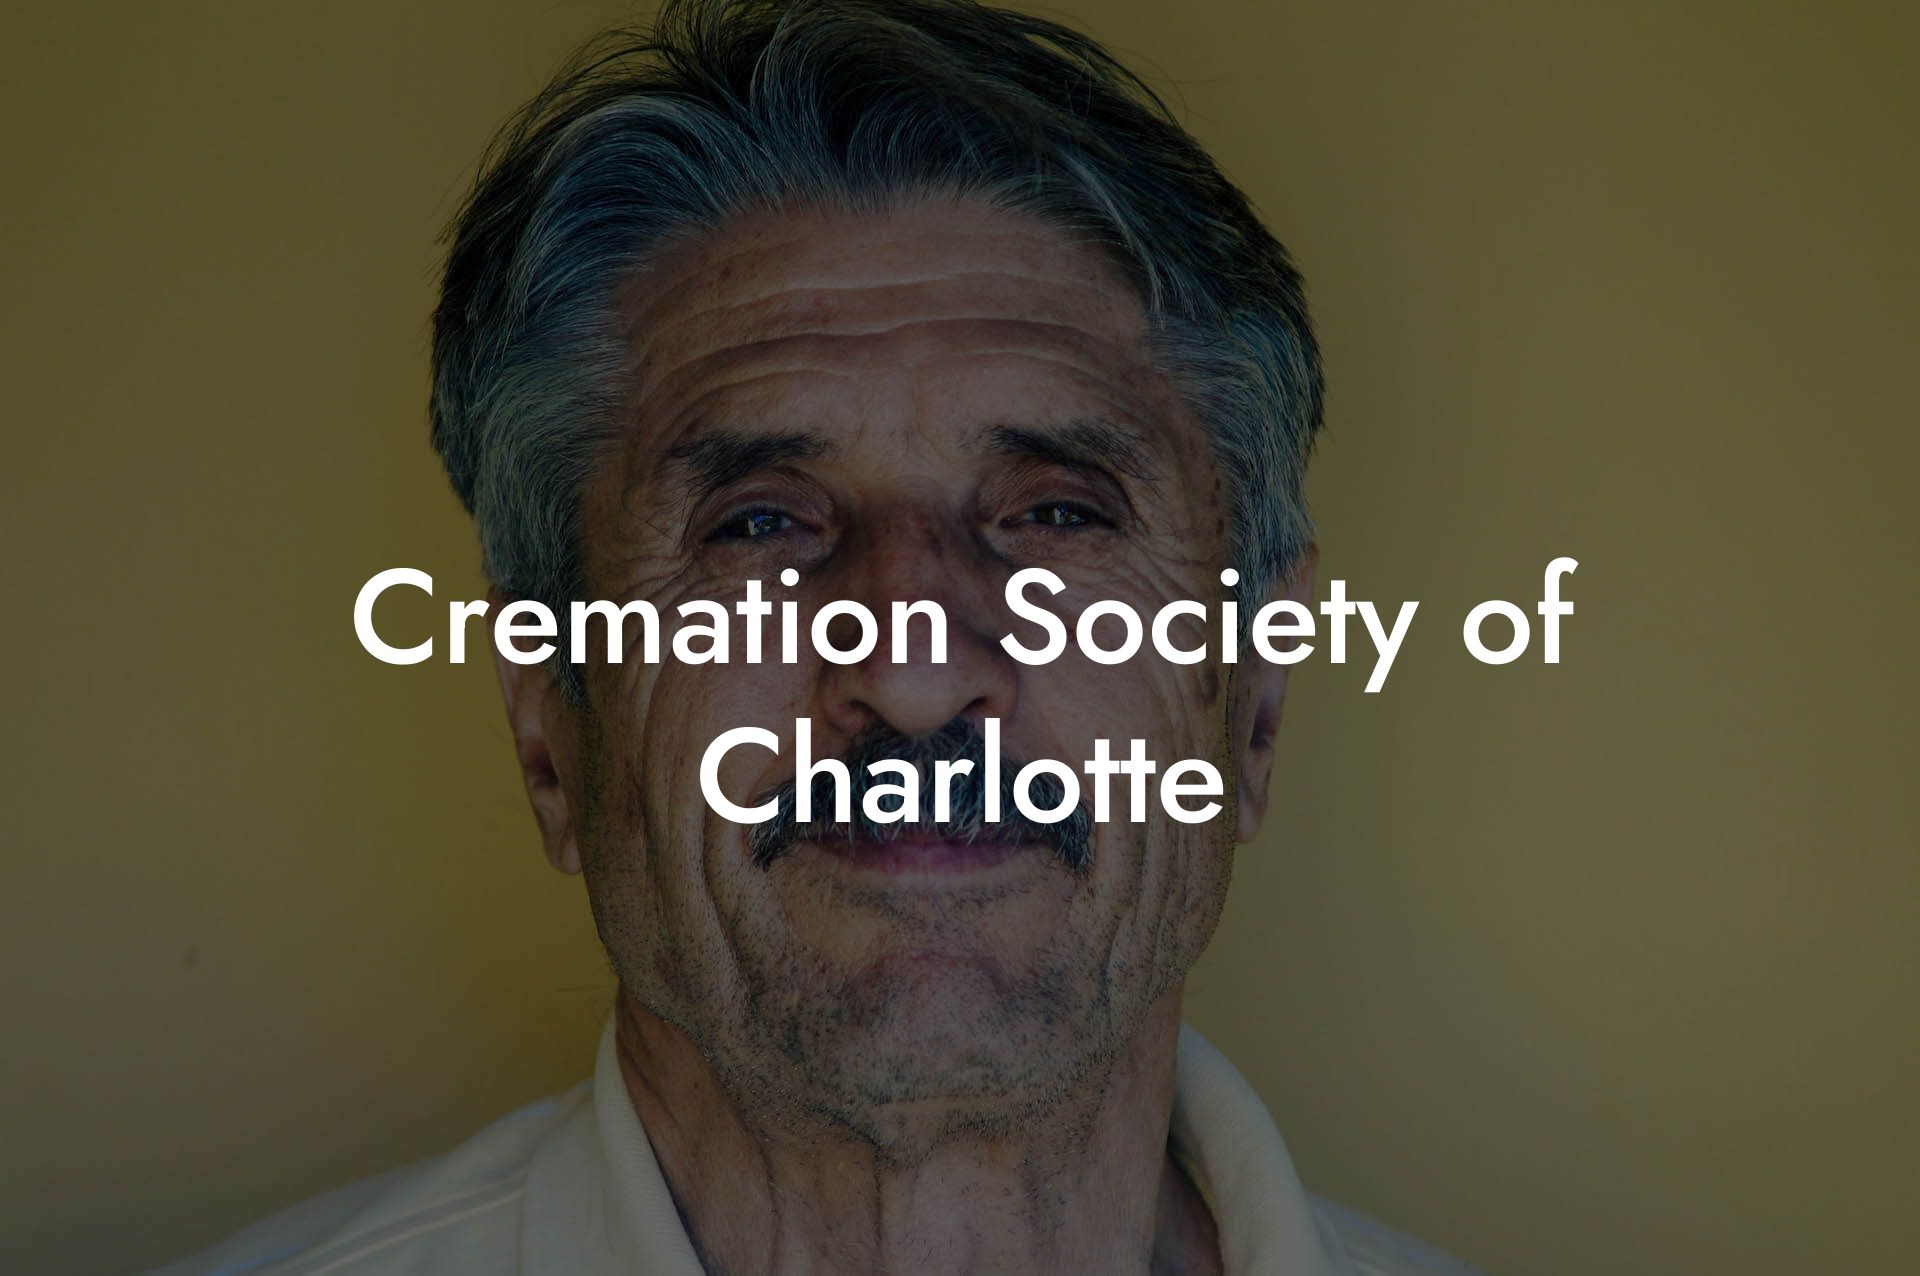 Cremation Society of Charlotte